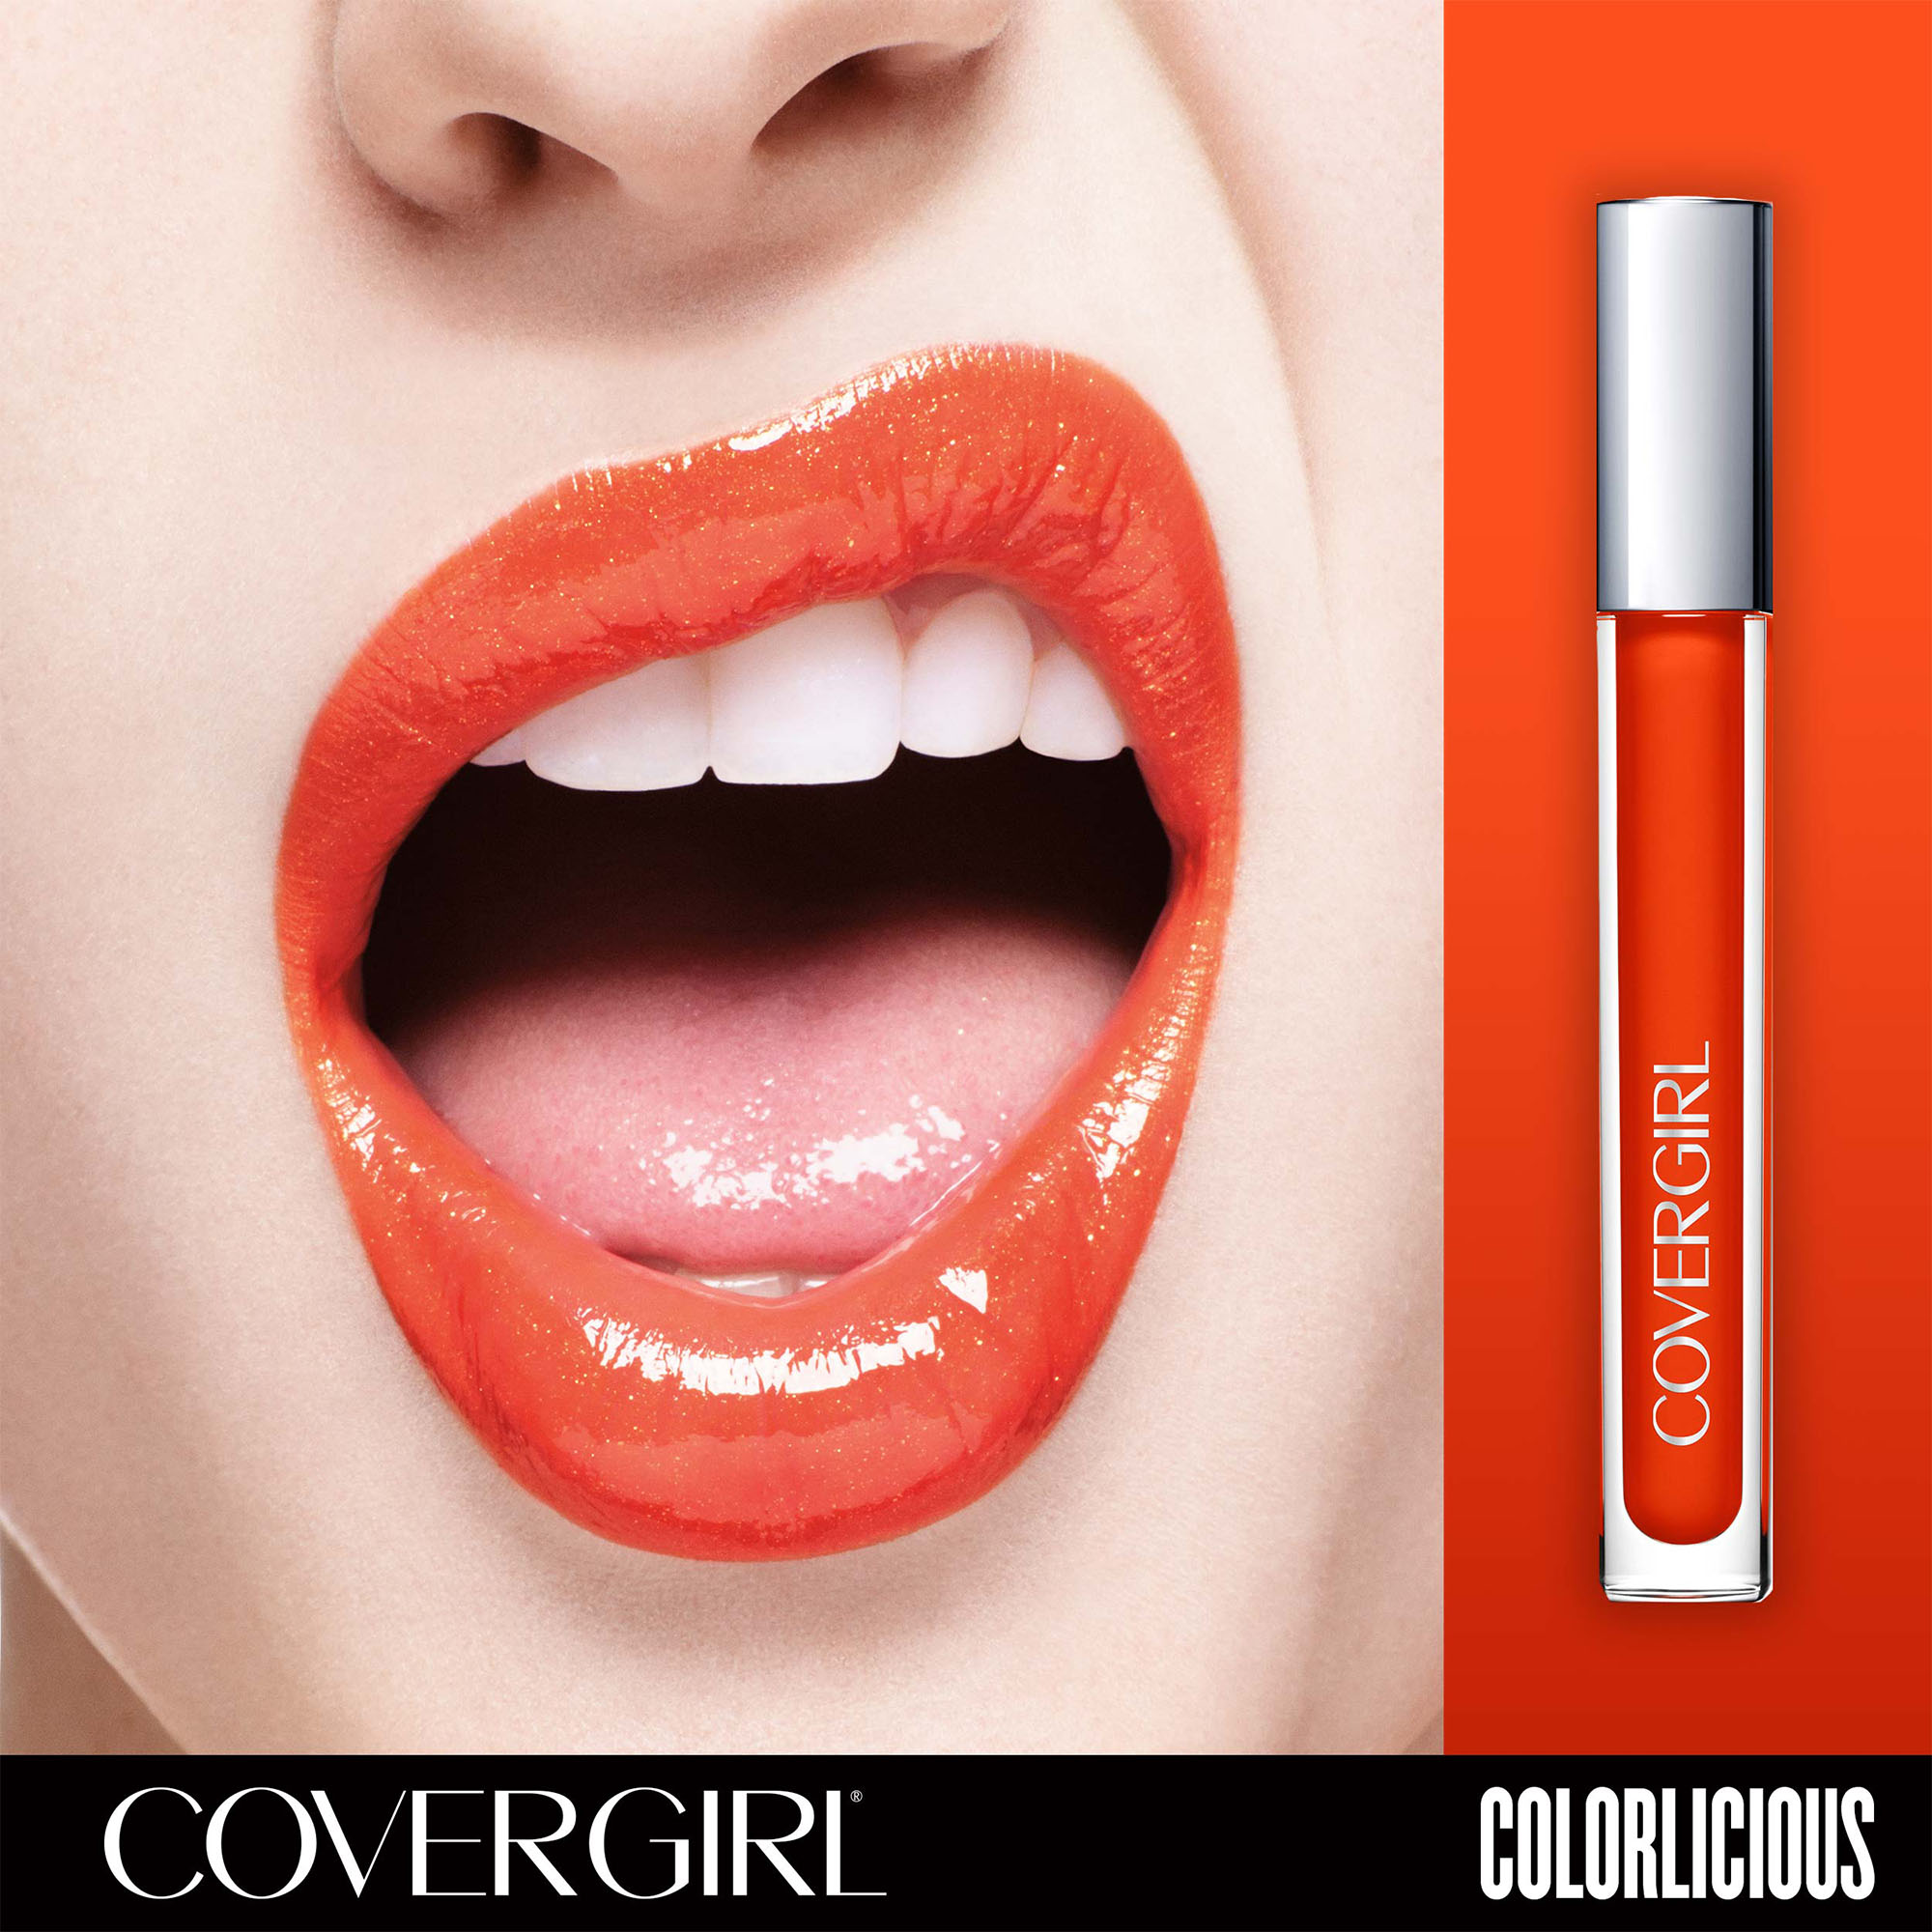 COVERGIRL Colorlicious High Shine Lip Gloss, 670 Succulent Citrus - image 3 of 5